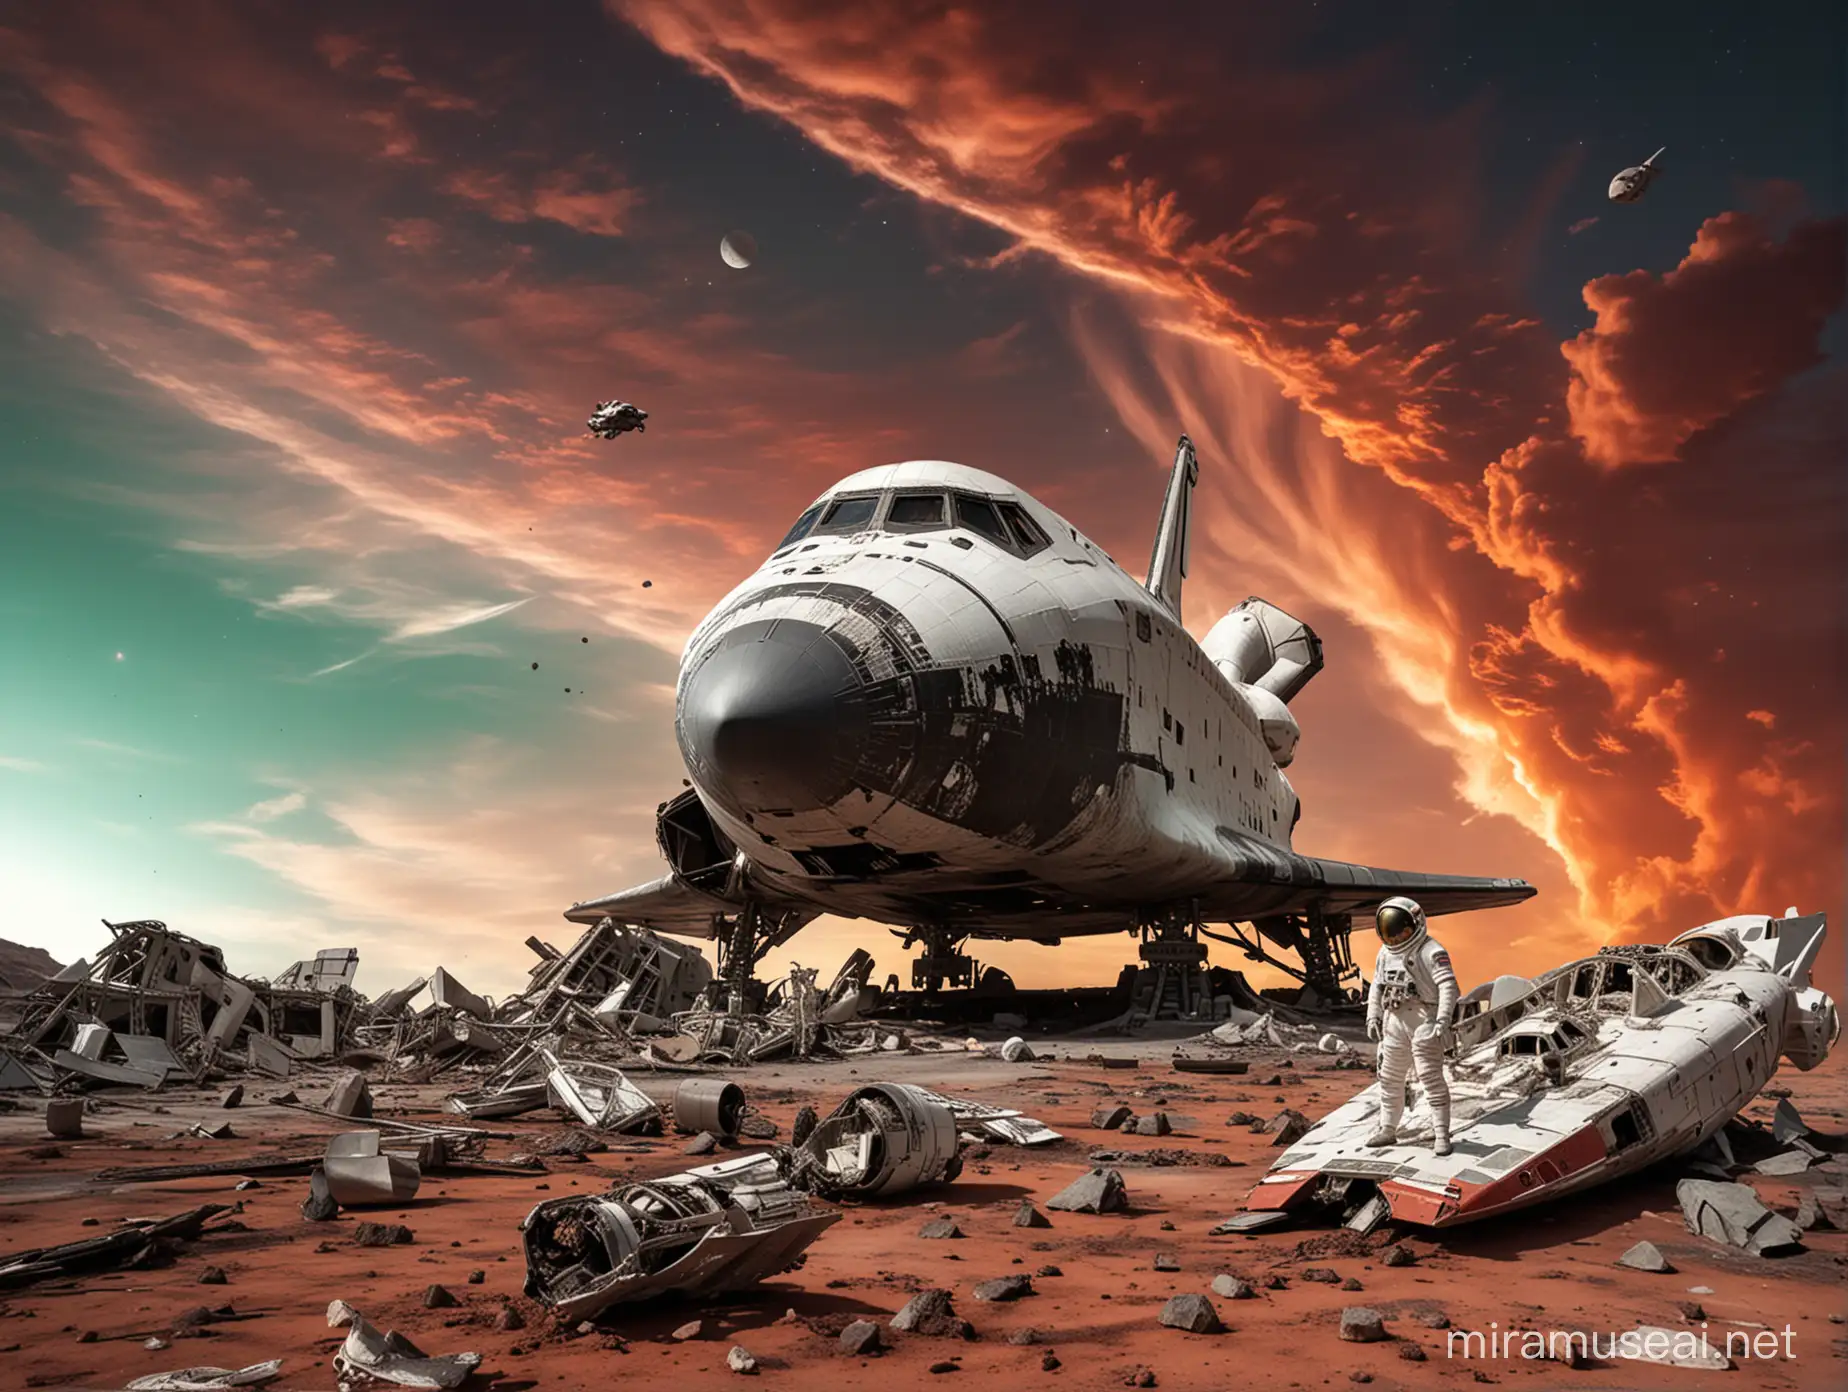 In the foreground, an astronaut in a space suit stands next to his destroyed damaged space shuttle, behind the shuttle lies an old damaged alien spaceship, red sky with green clouds and two moons,